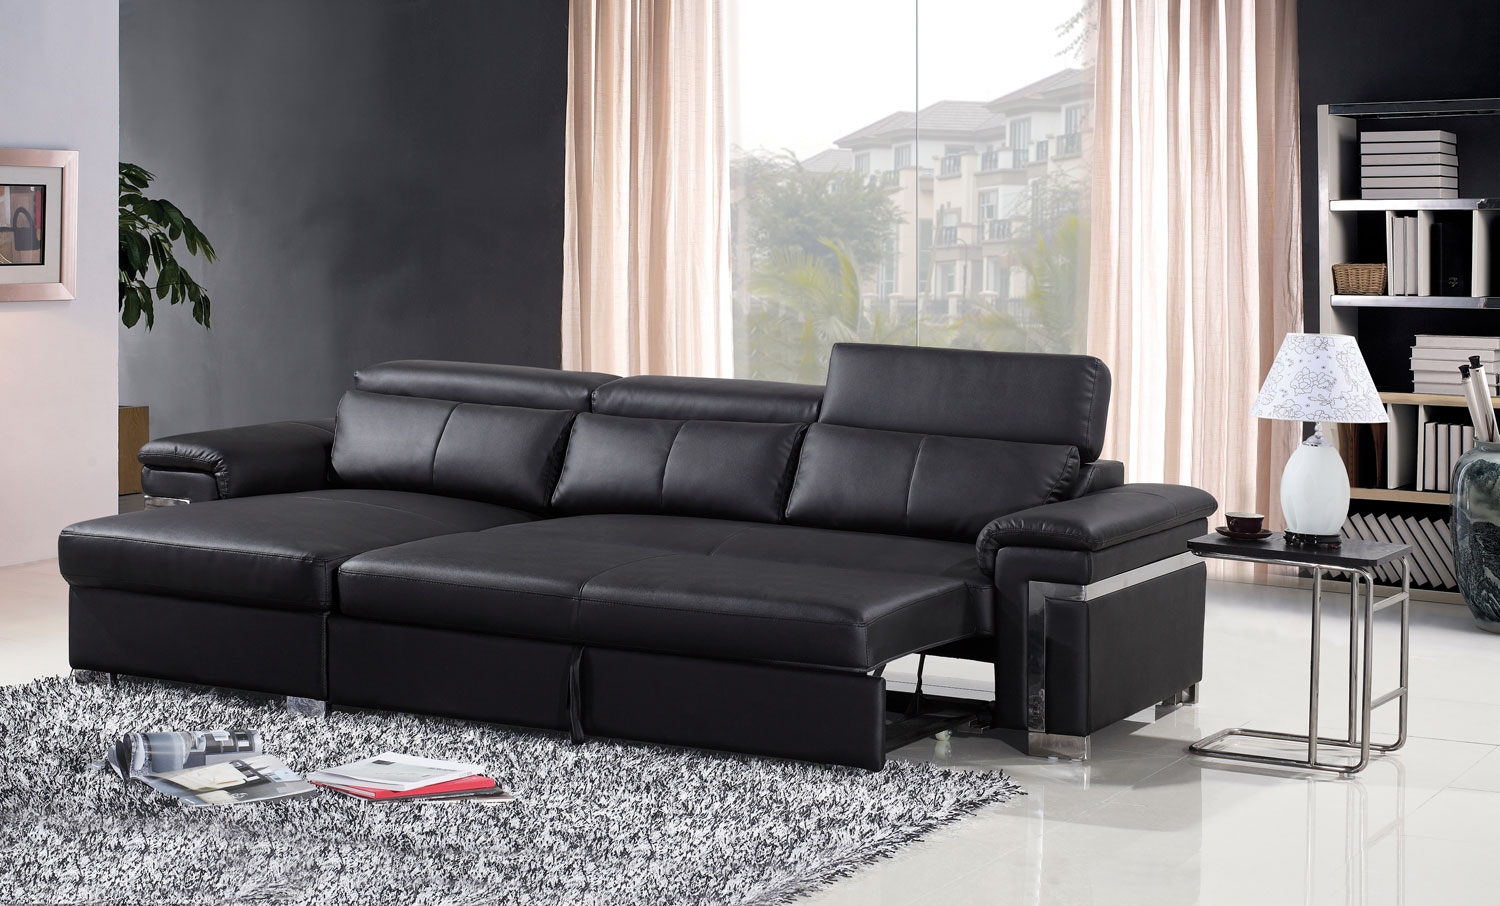 Sofa leather bed cheap sofa beds for sale discount sofa bed small leather sofa bed sale YOSTNFU